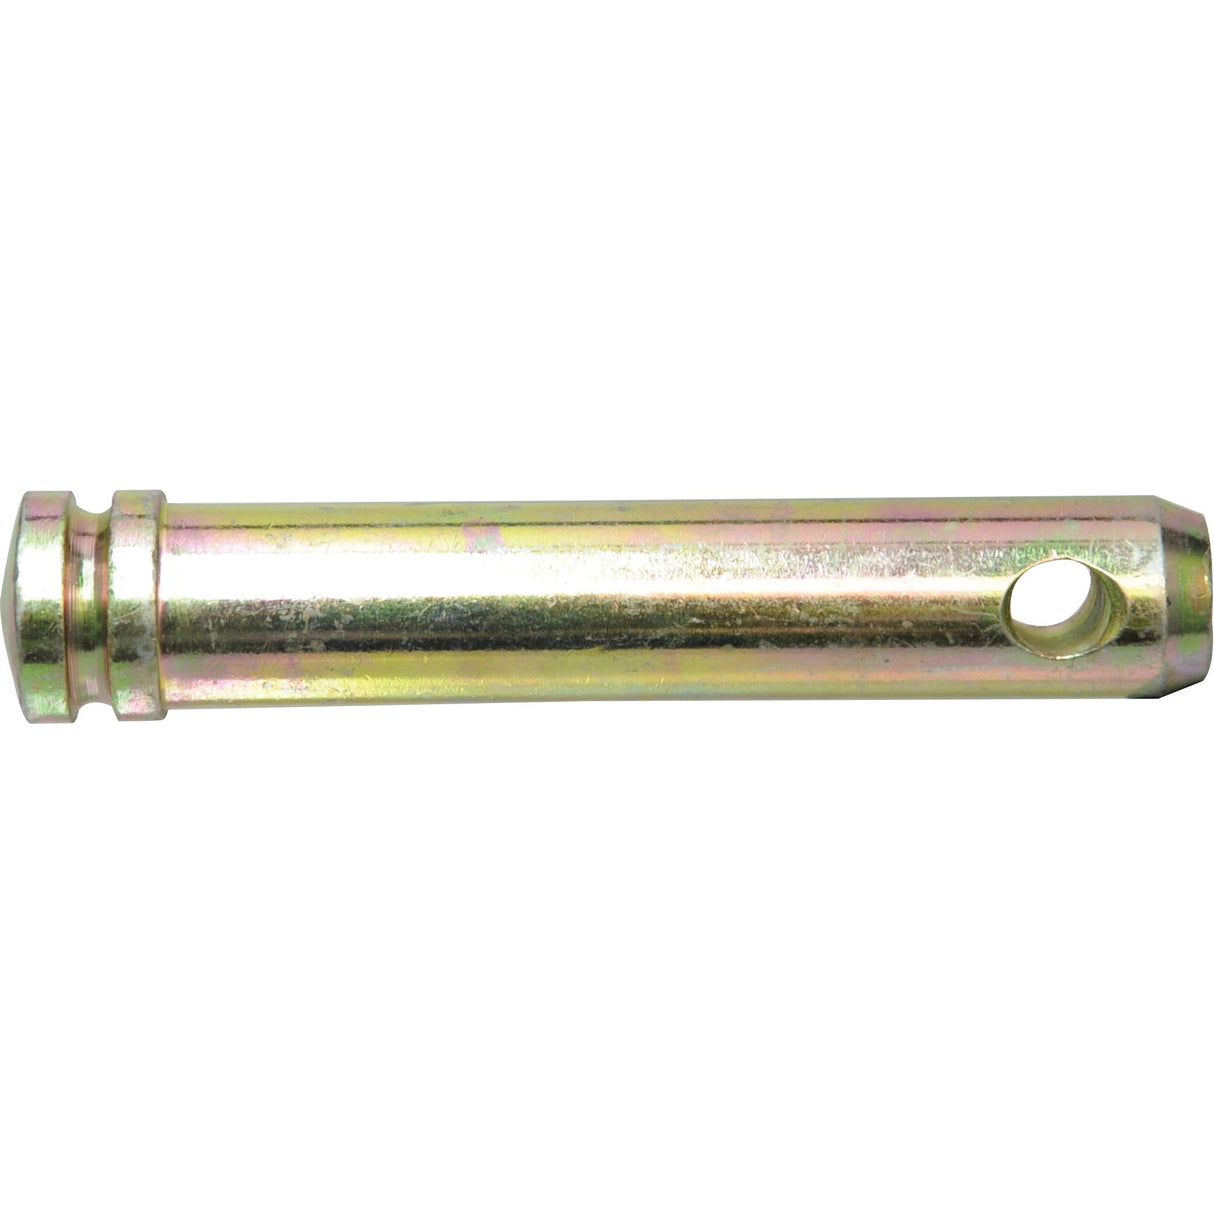 Top link pin 25x110mm Cat. 2
 - S.900081 - Massey Tractor Parts